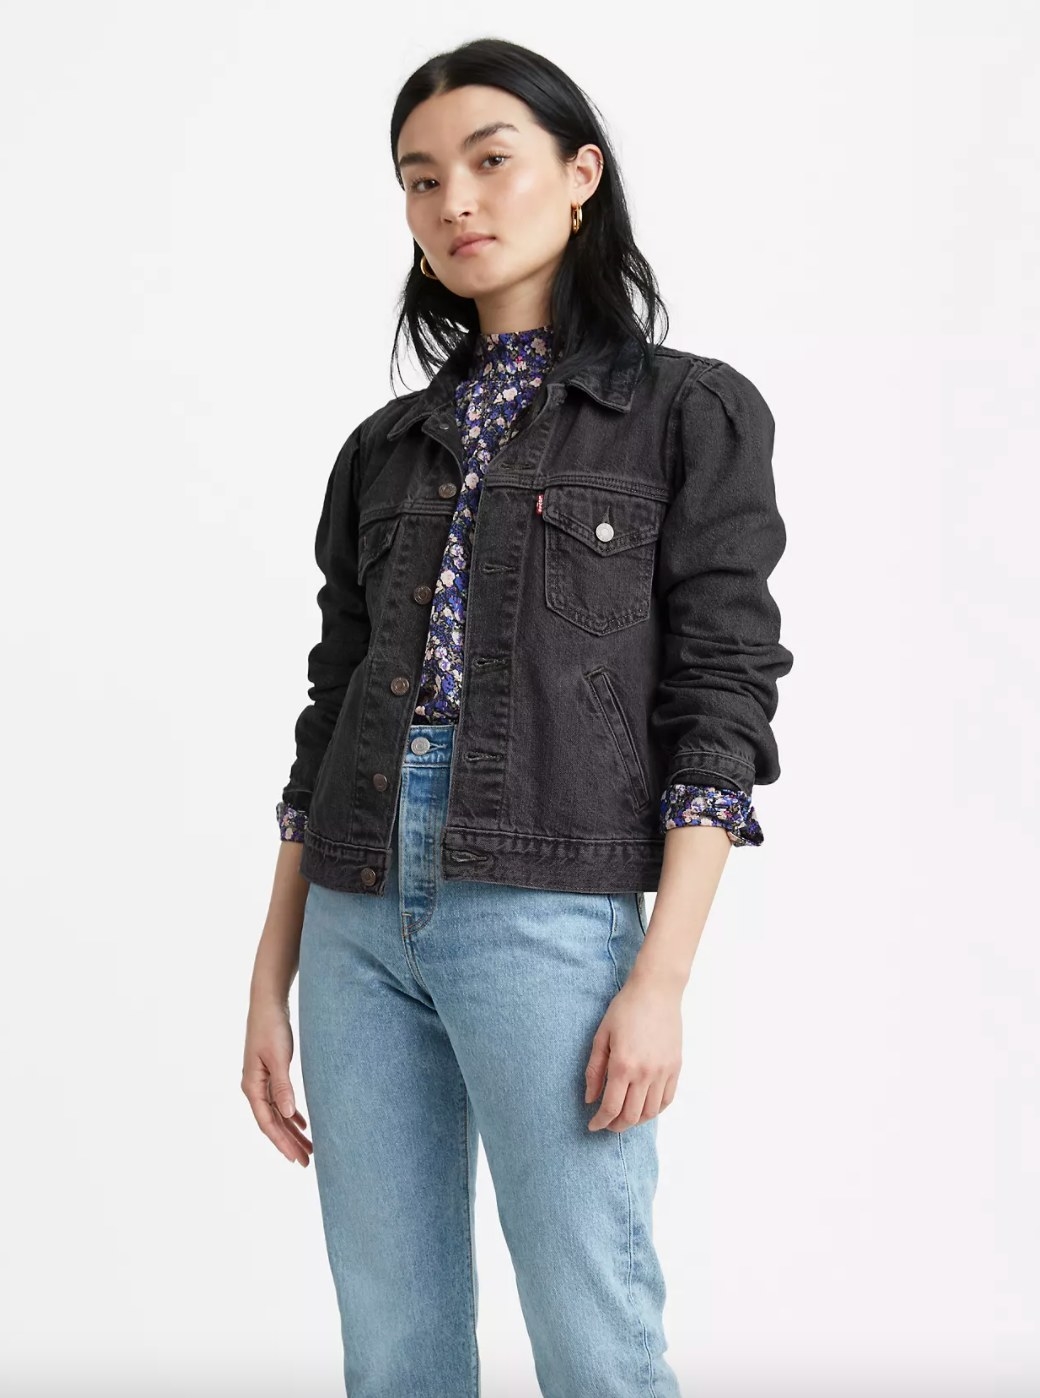 The jean jacket in overcast day grey